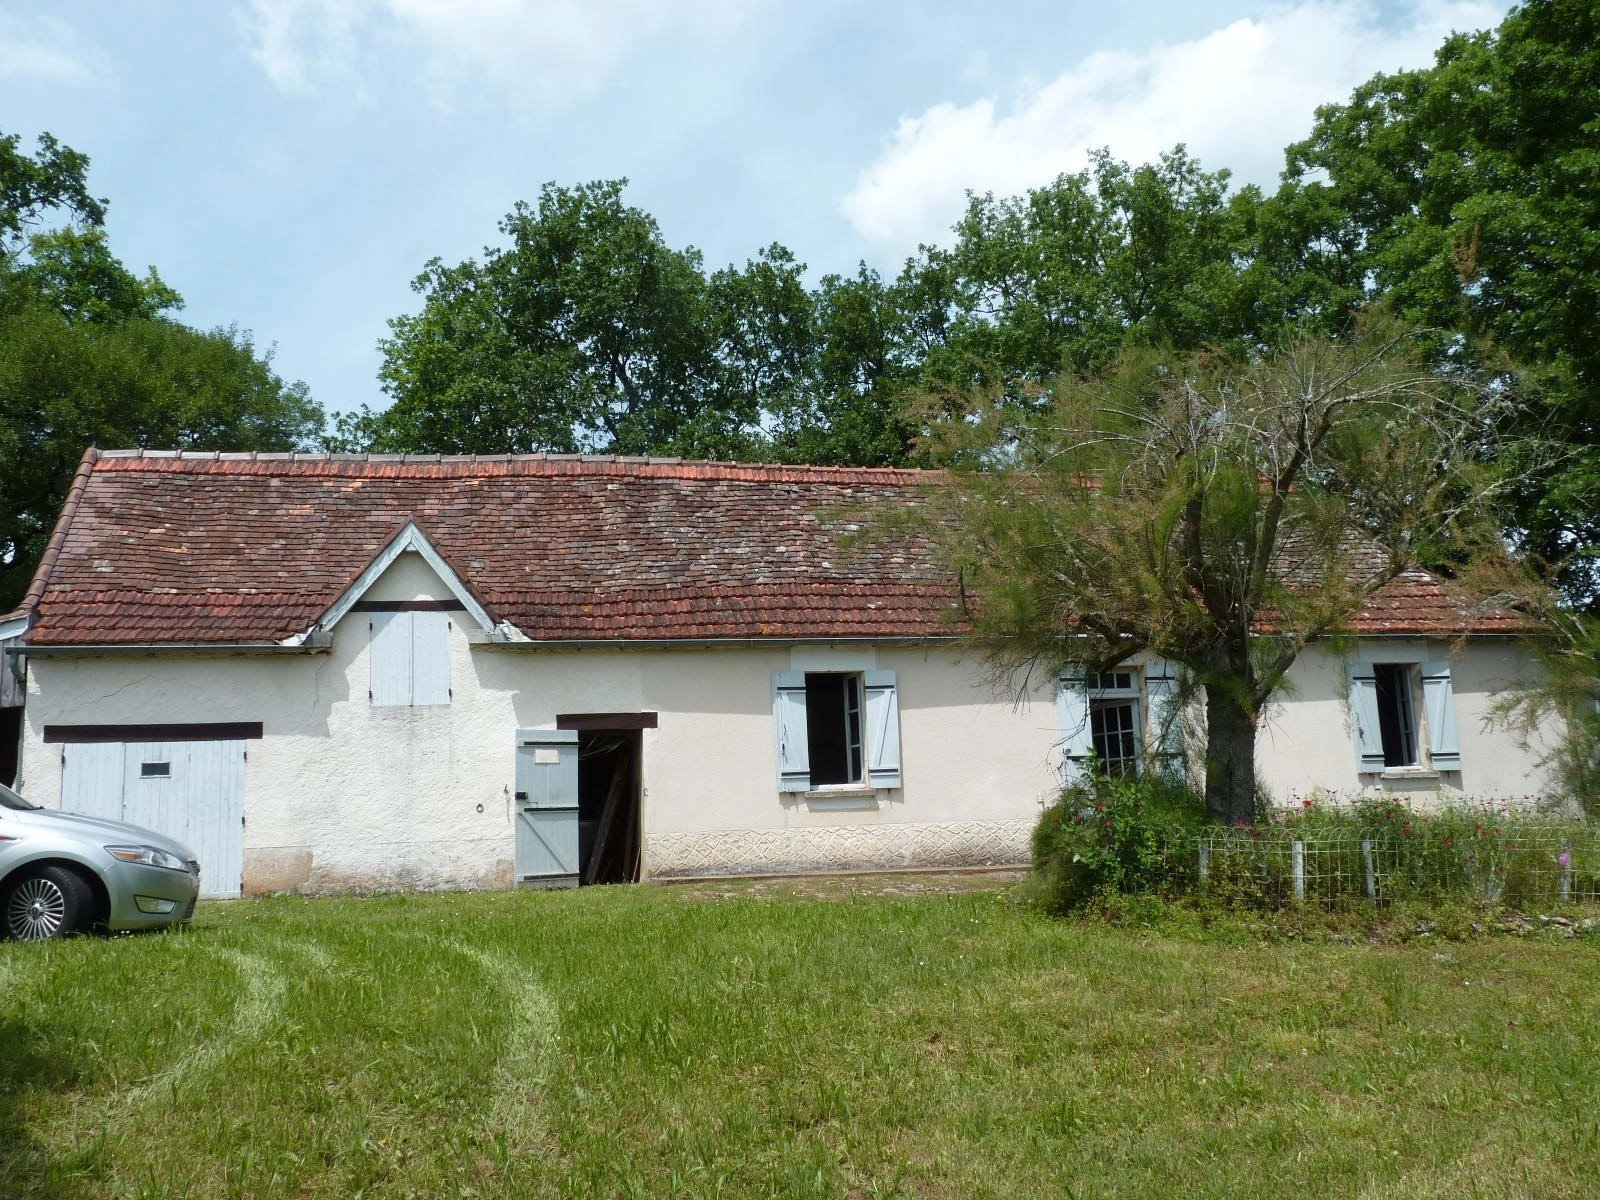 Stone house with 2 bedrooms to renovate and possibly enlarge, on 2 acres with stone barn